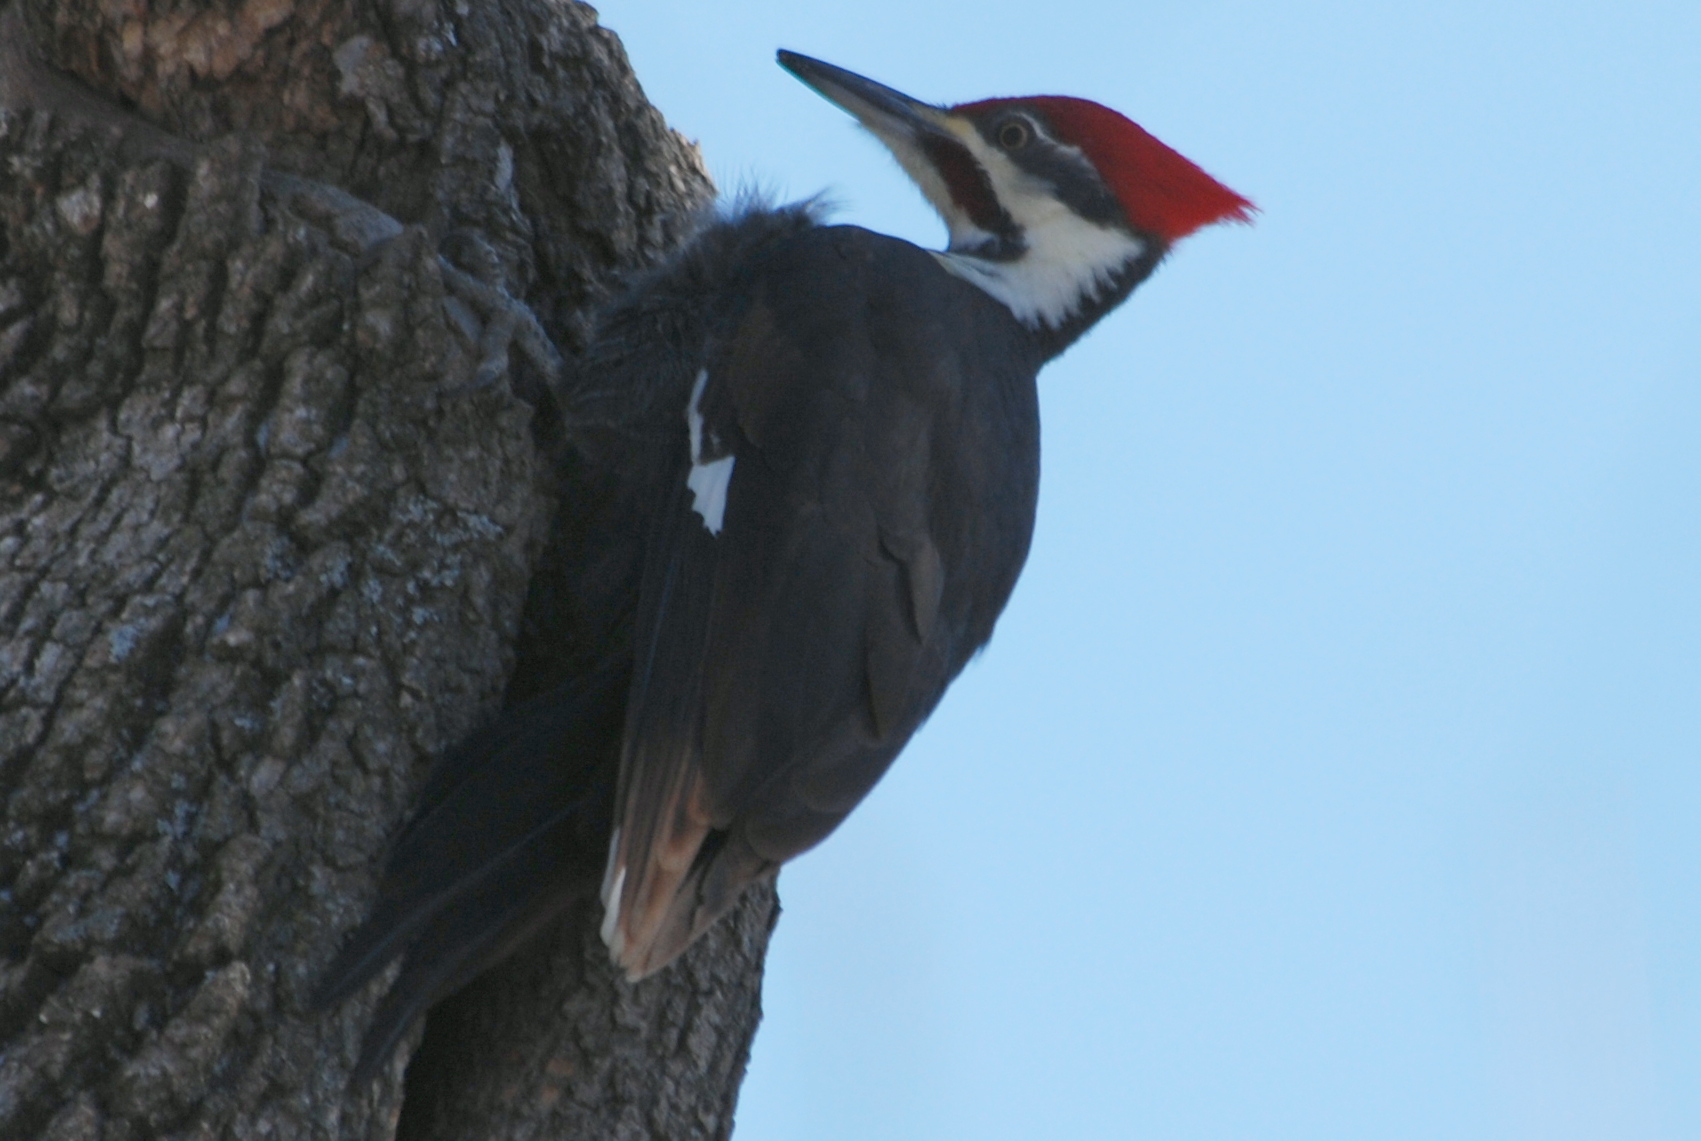 Click picture to see more Pileated Woodpeckers.